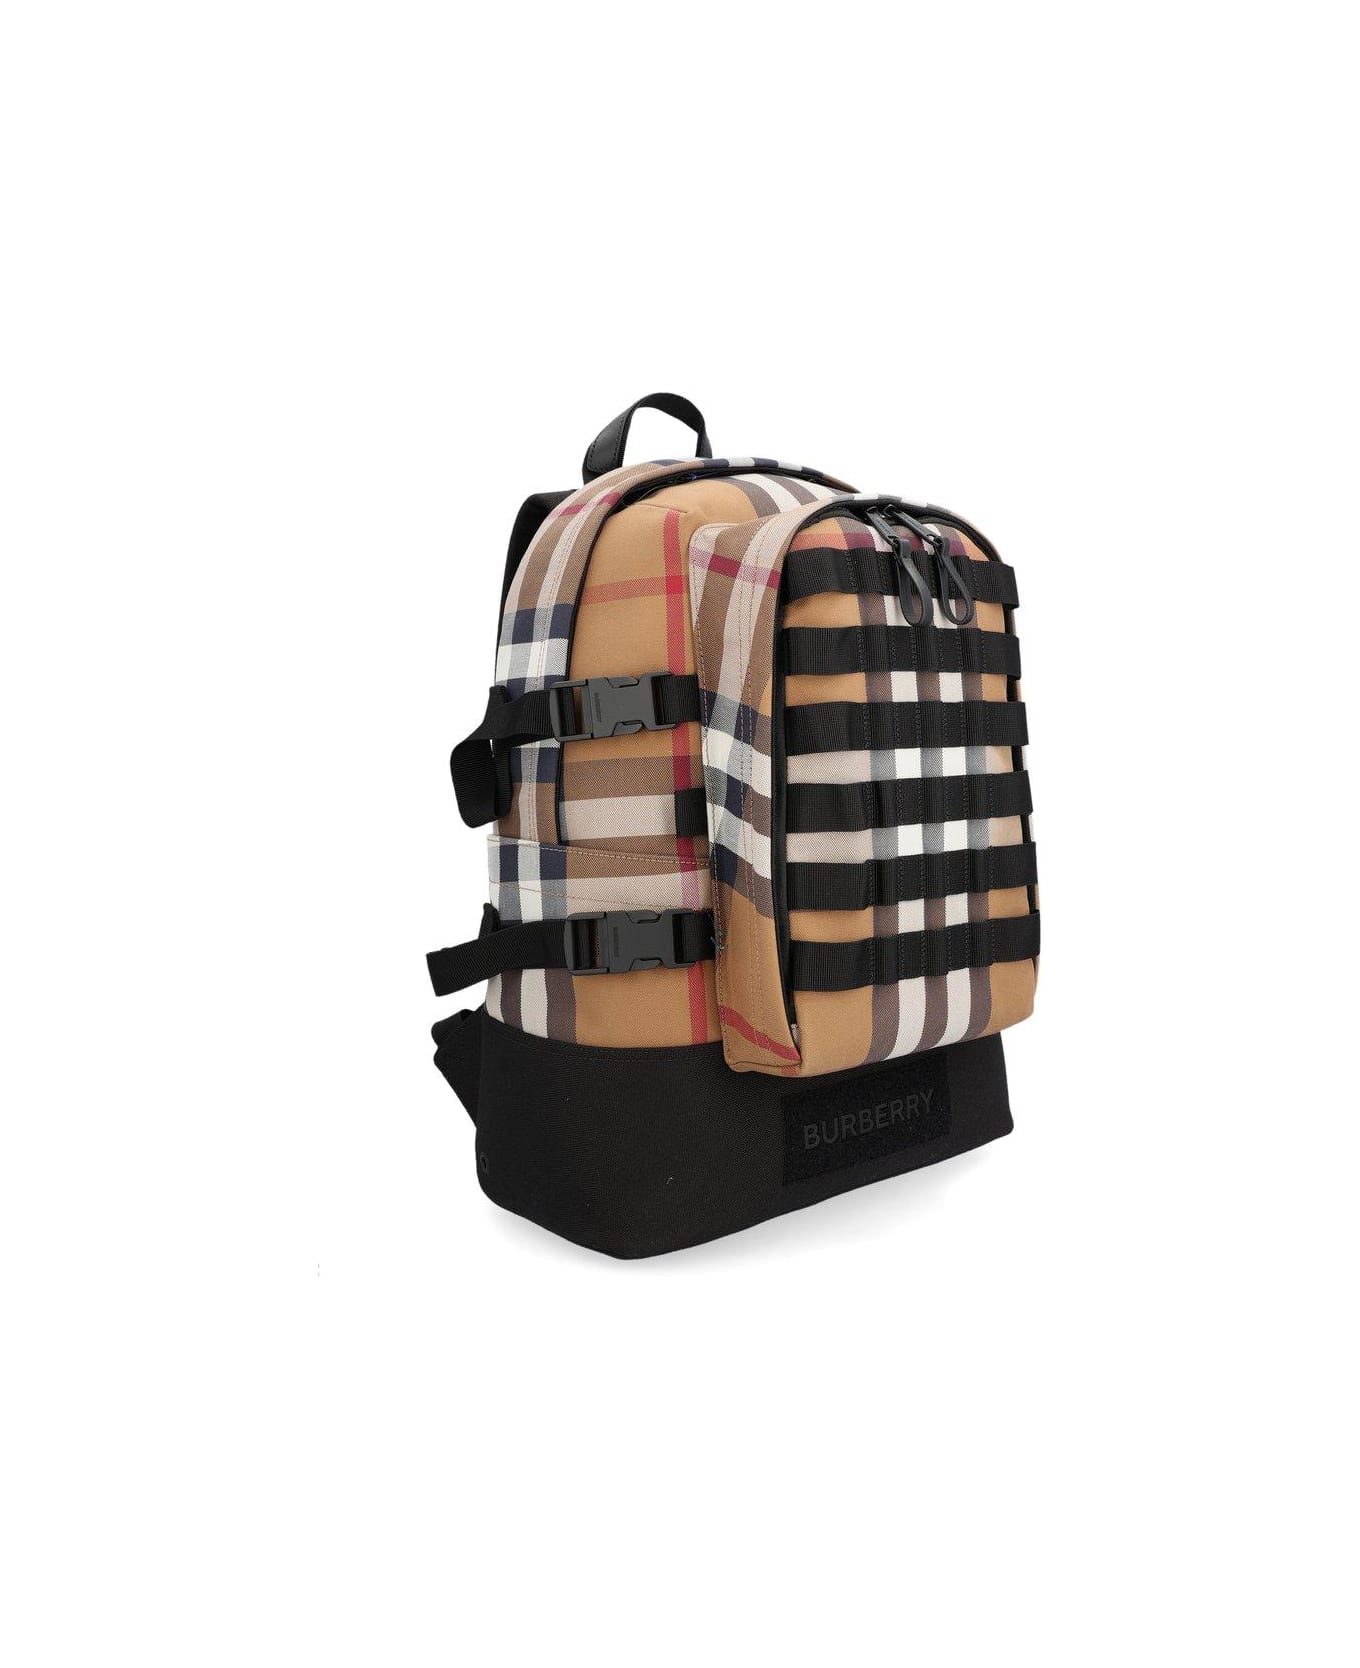 Burberry Rockford Checked Zipped Backpack - Birch brown check